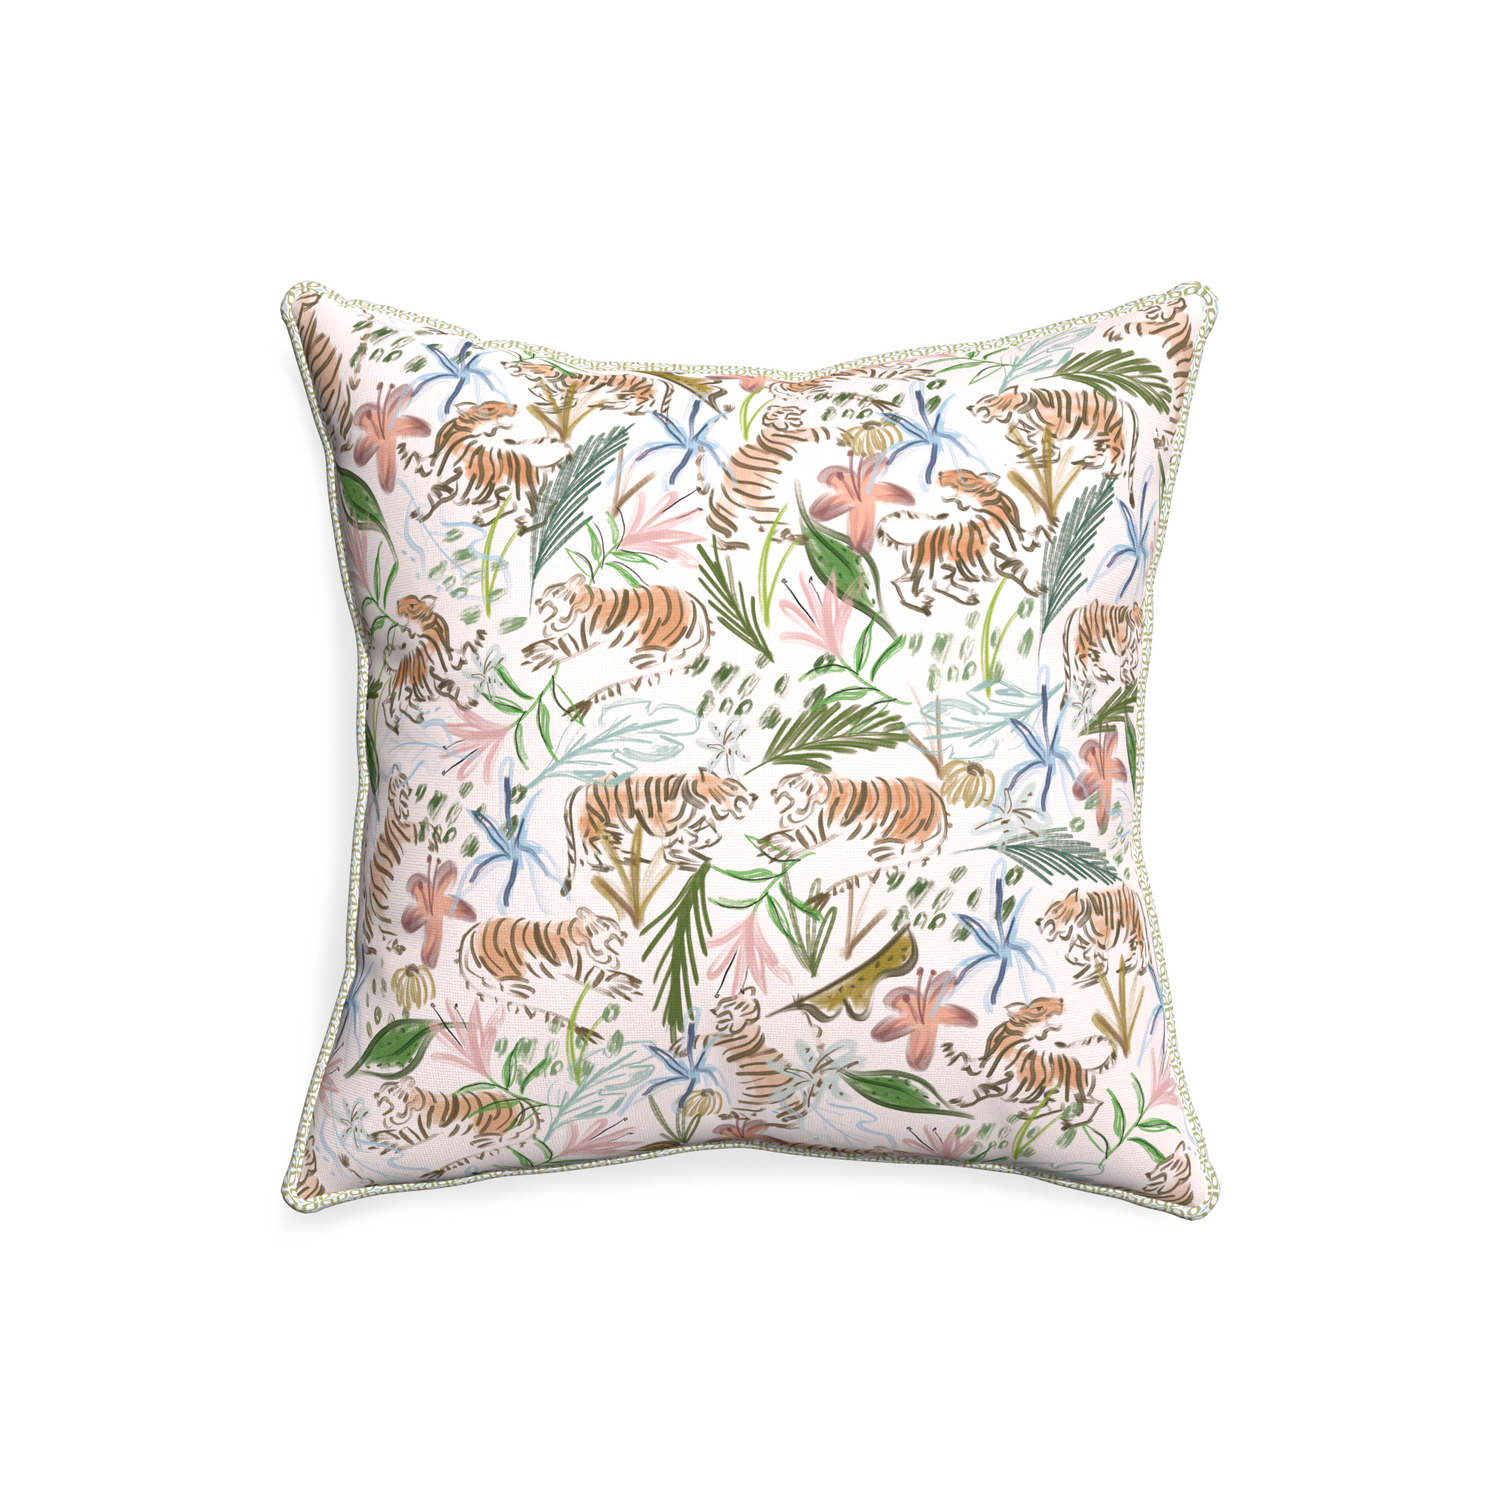 20-square frida pink custom pink chinoiserie tigerpillow with l piping on white background